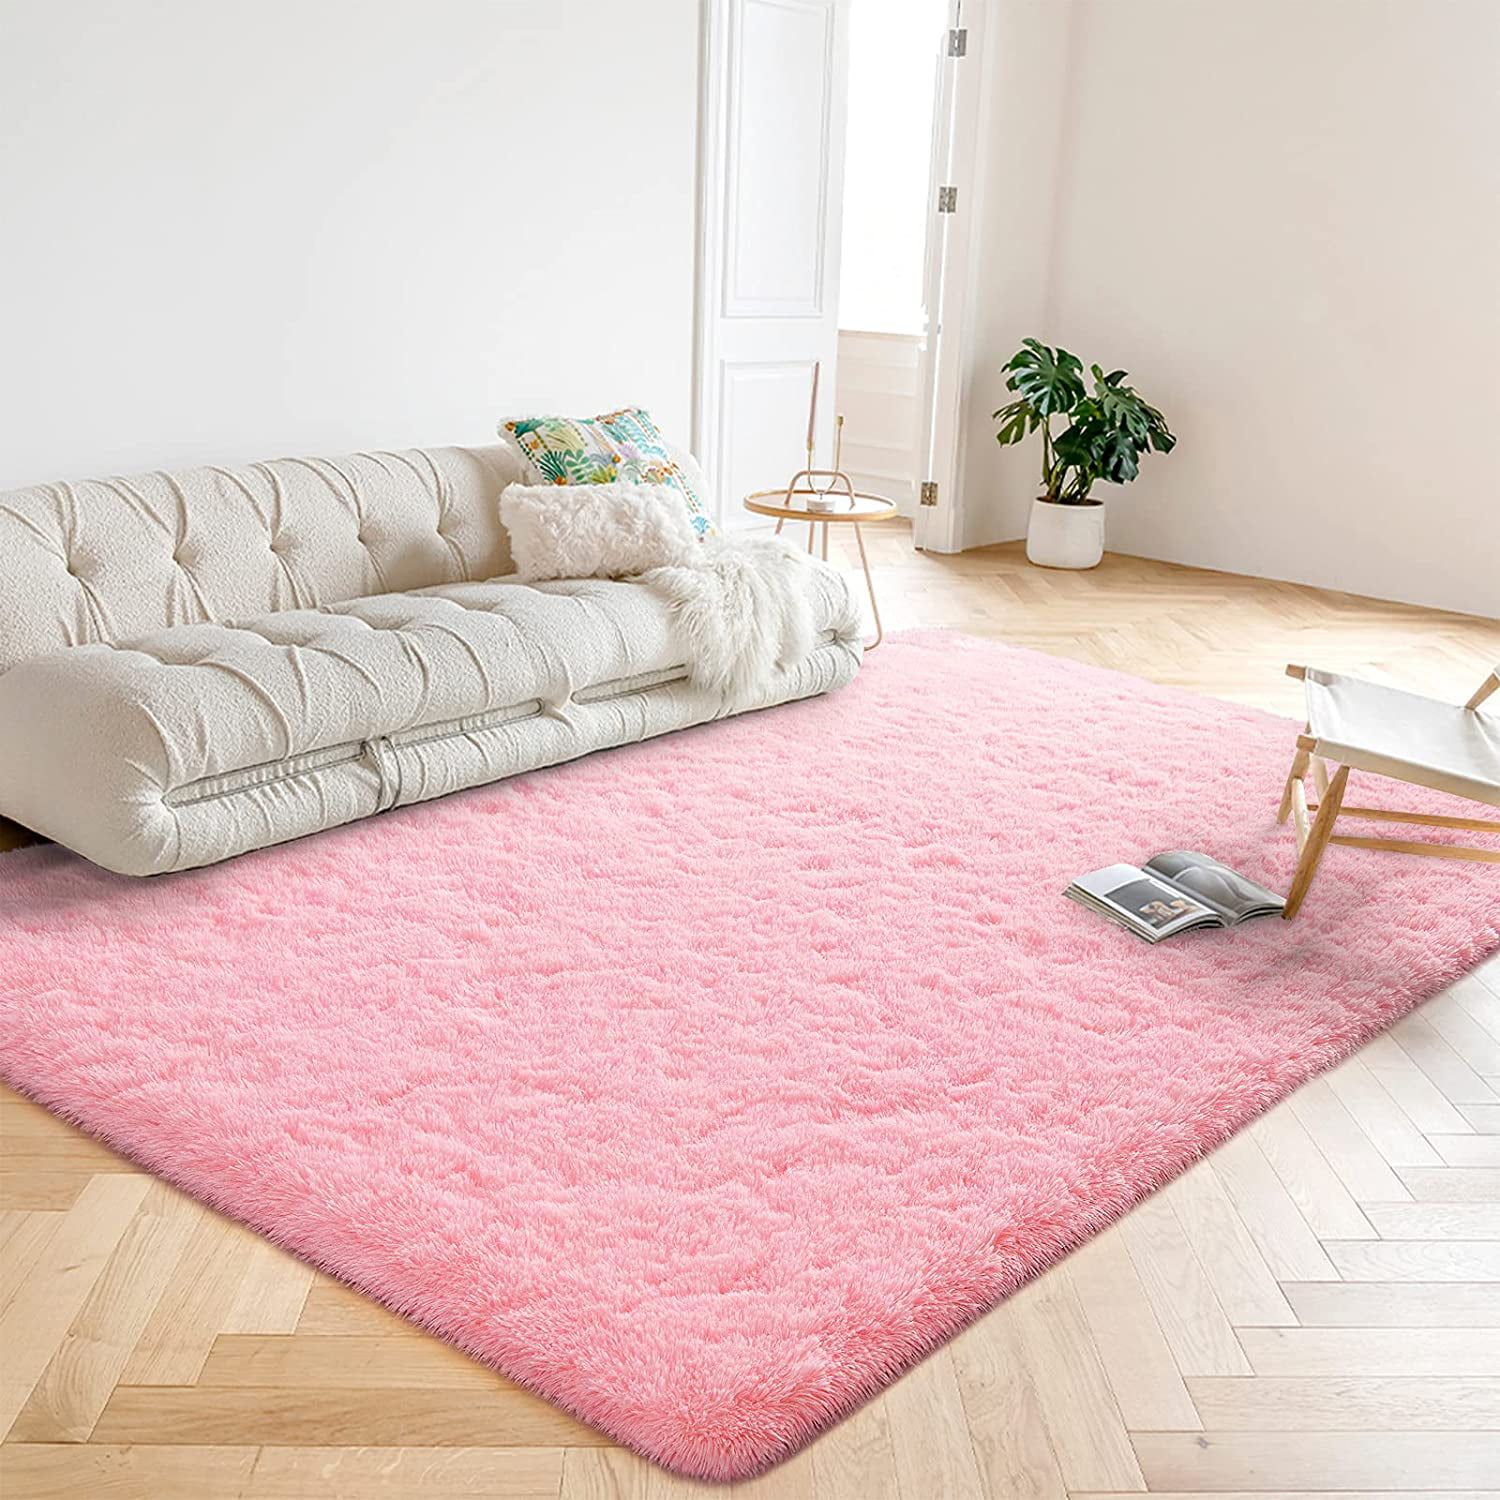 Lochas Luxury Fluffy Rugs Ultra Soft Shag Rug For Bedroom Living Room Kids  Room, Children,6'x9',pink – Walmart In Pink Soft Touch Shag Rugs (View 5 of 15)